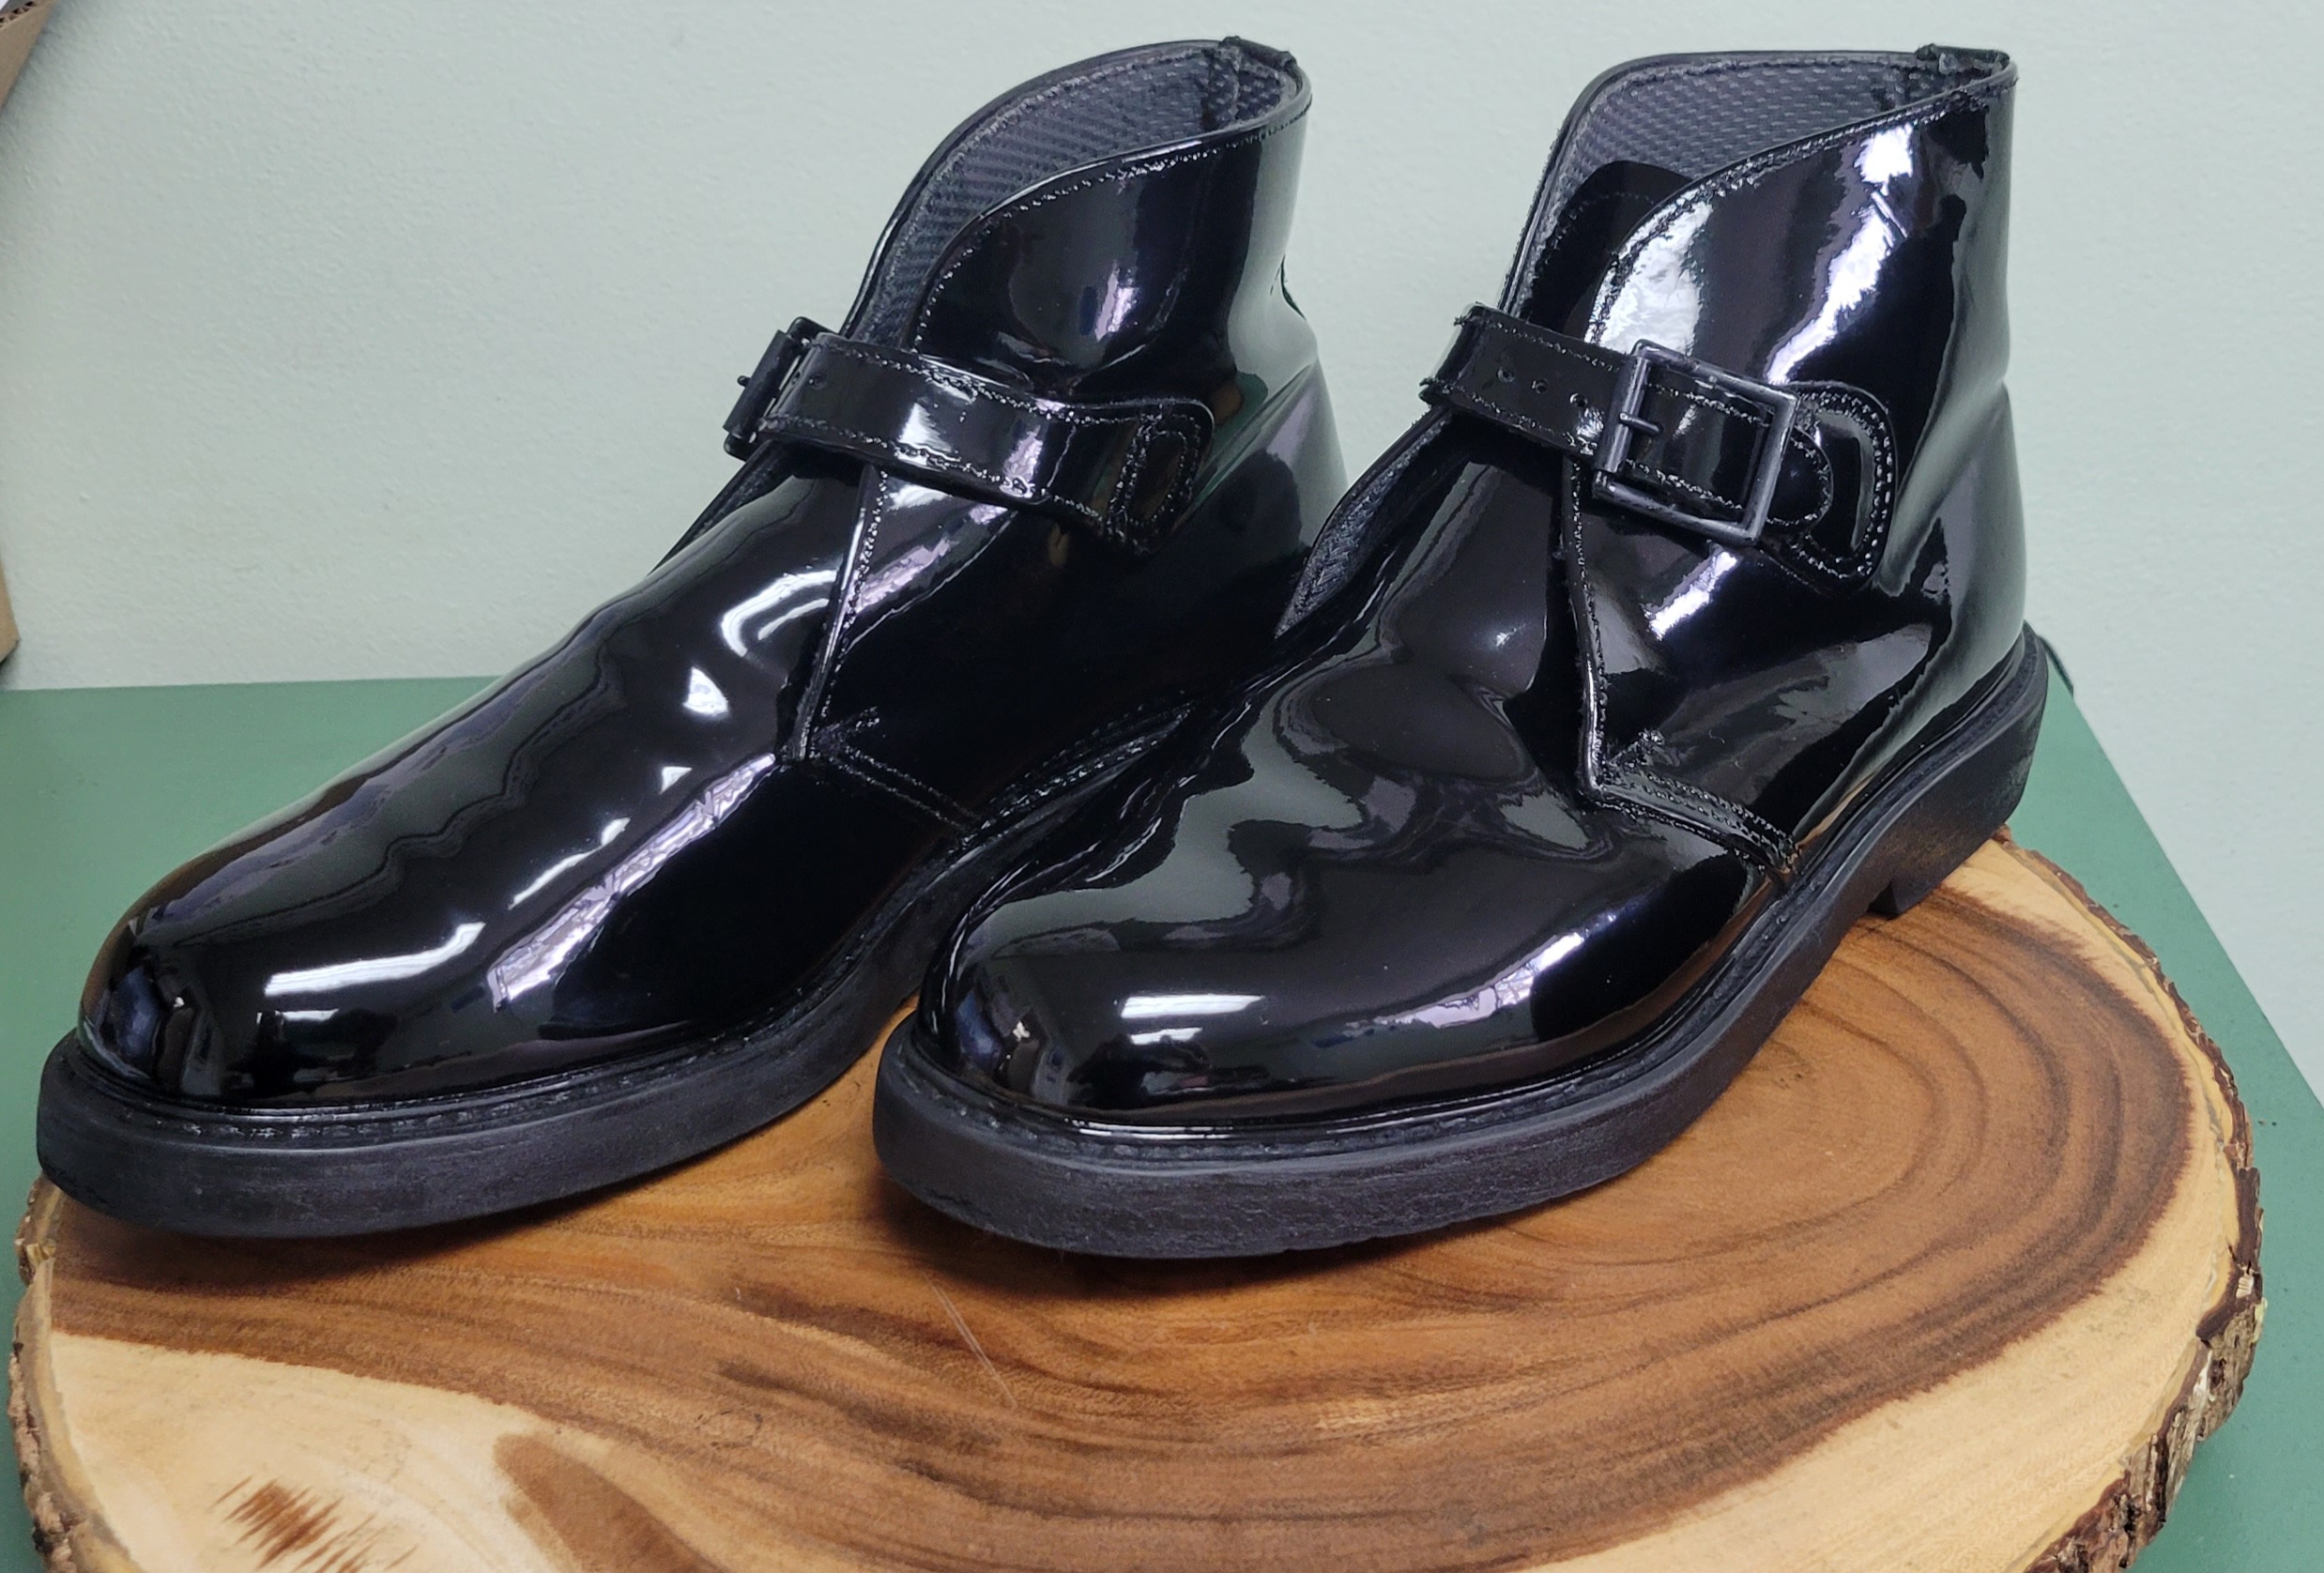 Live - Leather Luster Hi Gloss Brilliant Patent Leather Finish